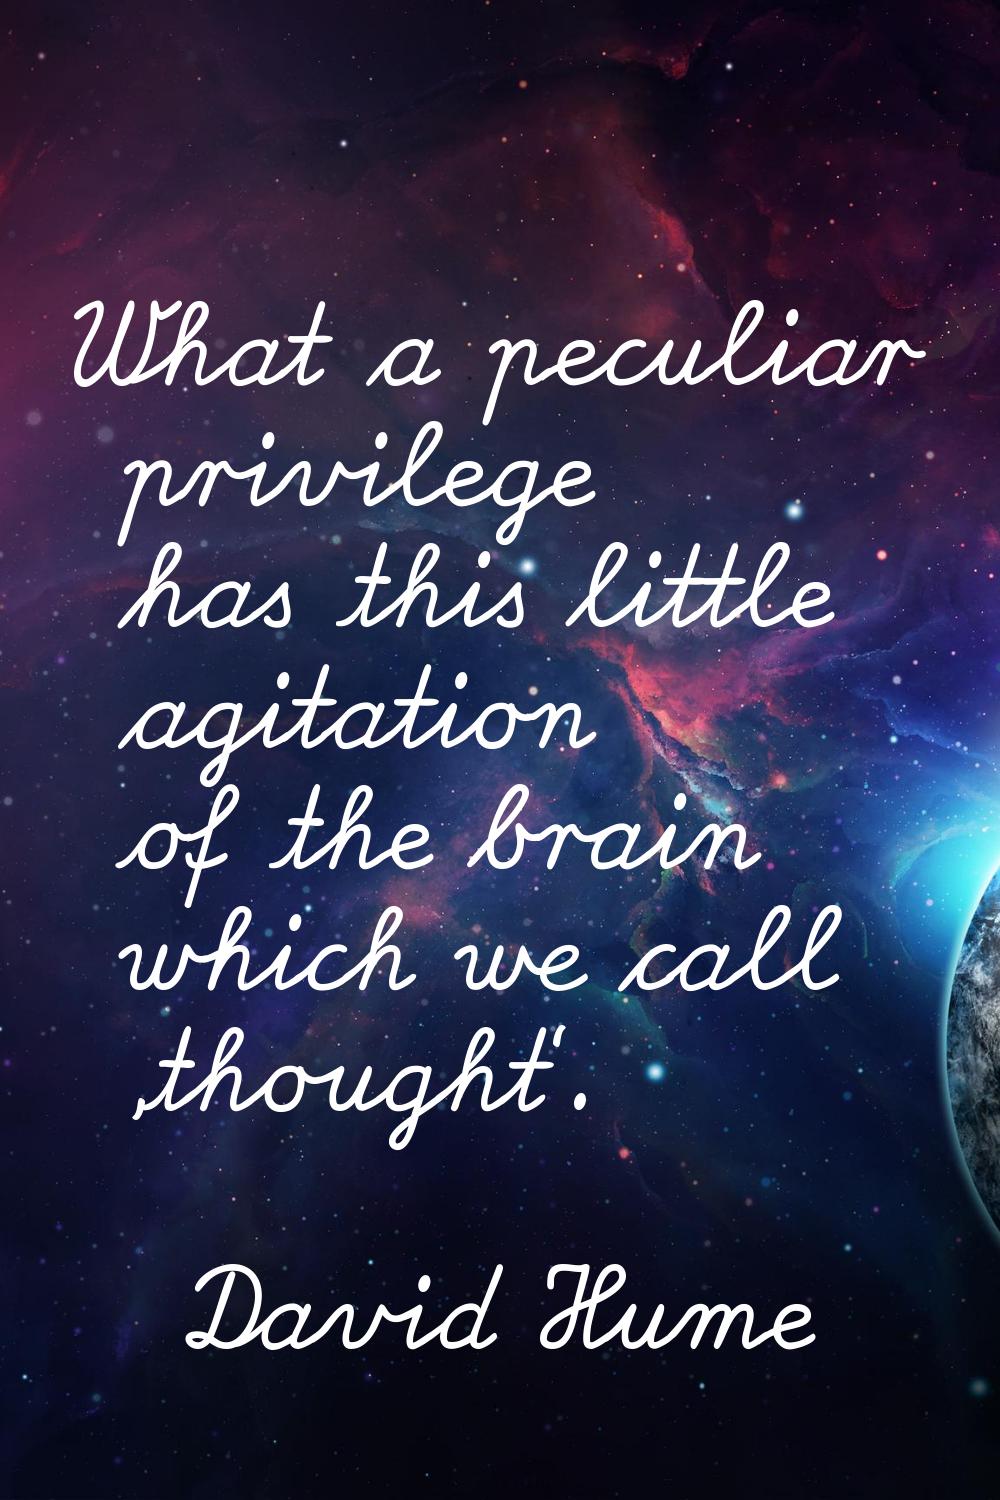 What a peculiar privilege has this little agitation of the brain which we call 'thought'.